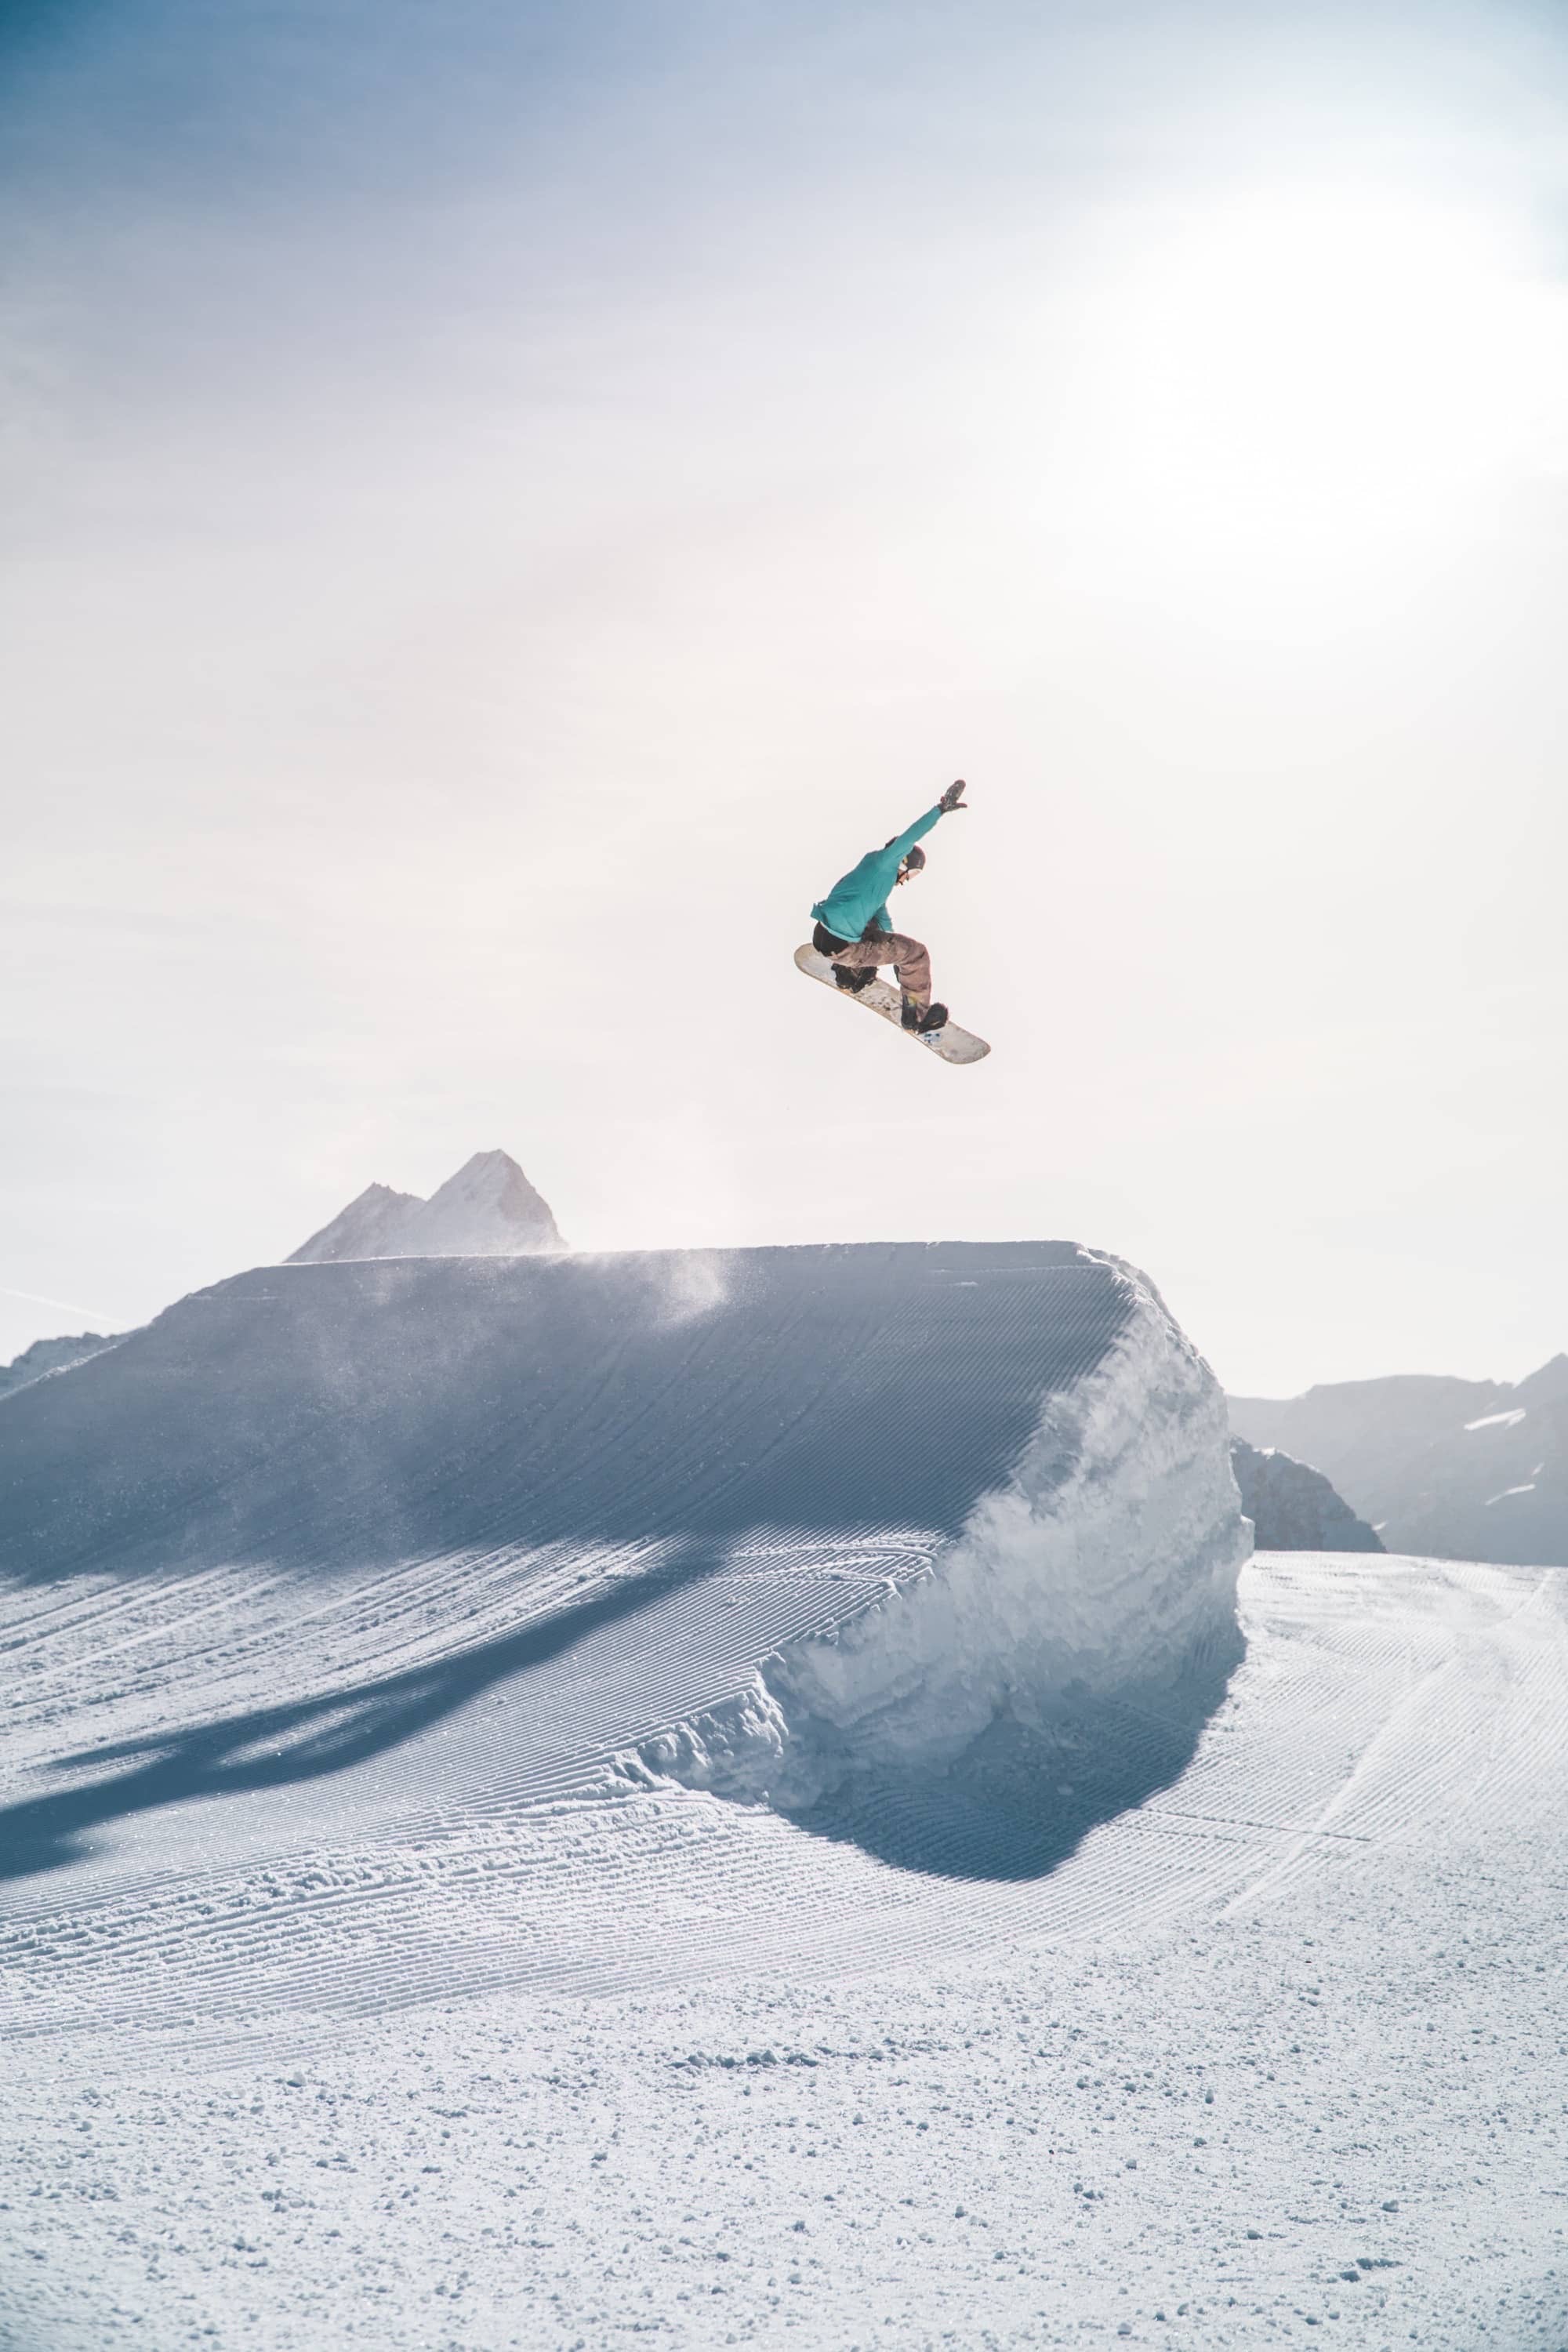 Snowboarding wallpaper by SadisticDeviant  Download on ZEDGE  4266